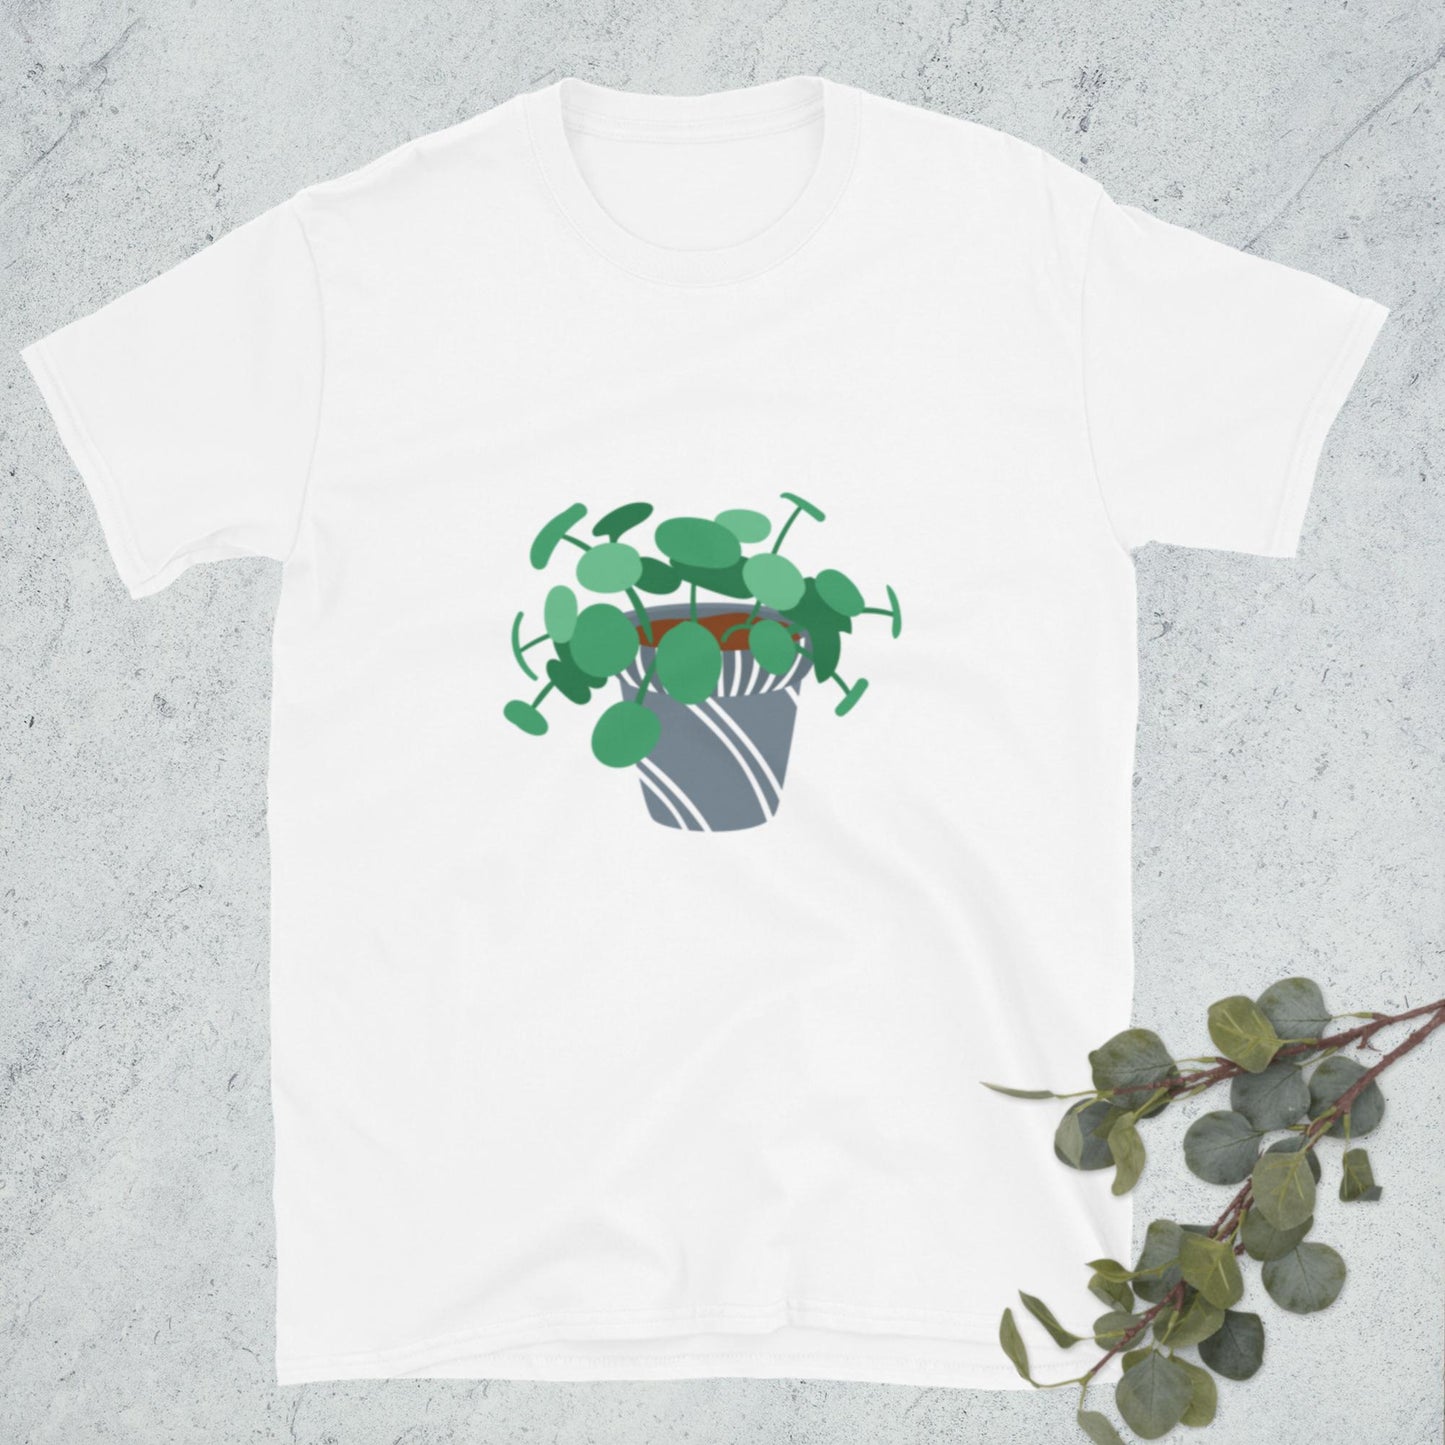 Potted Plant Shirt